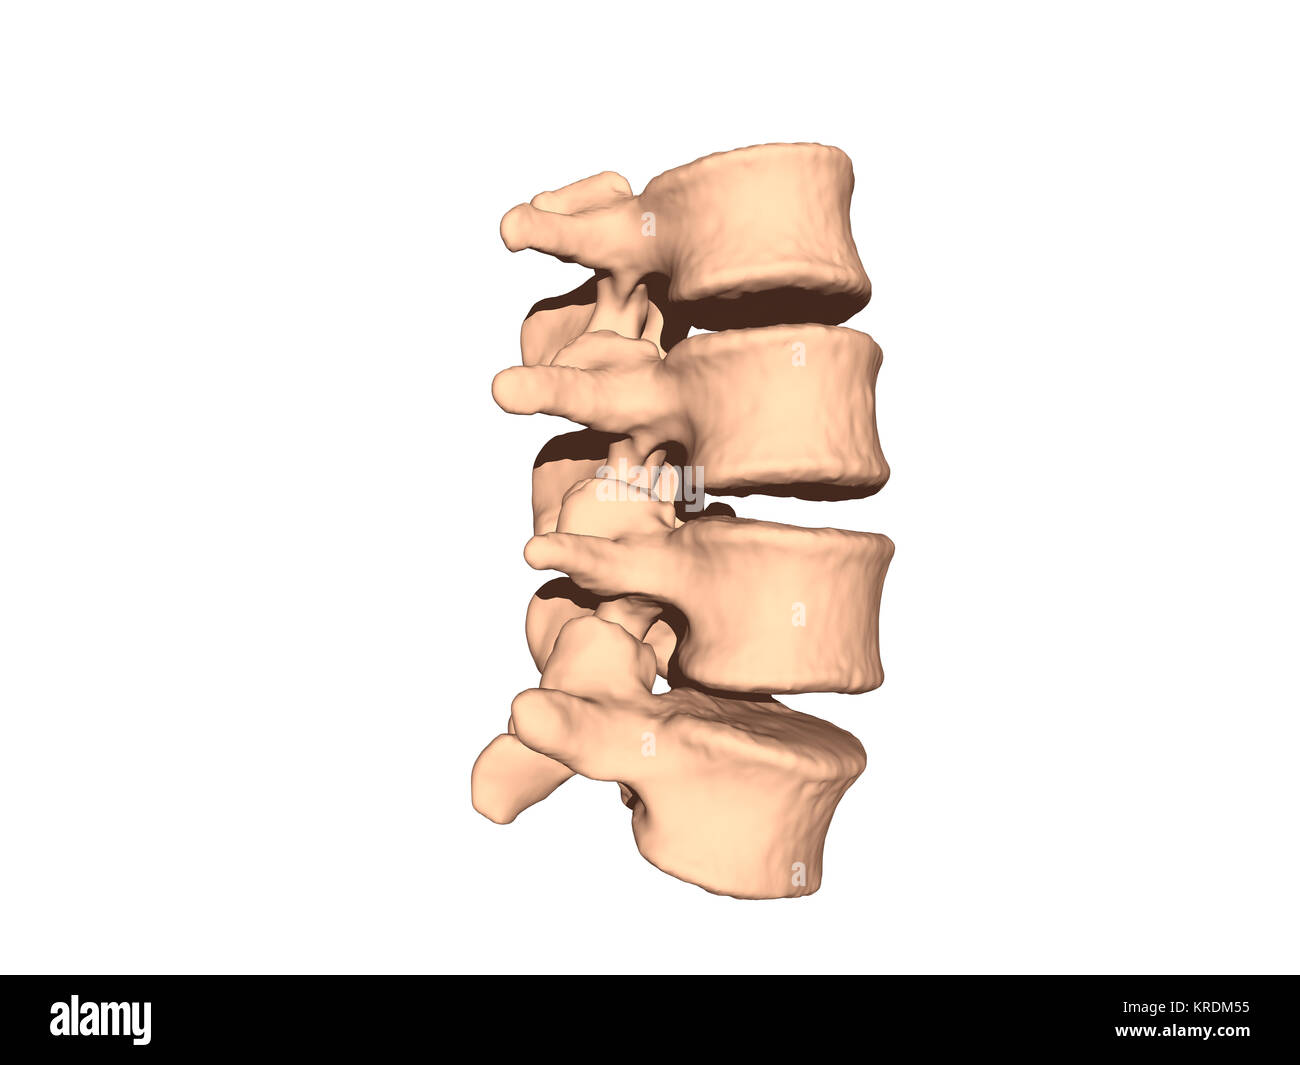 spine released in motion Stock Photo